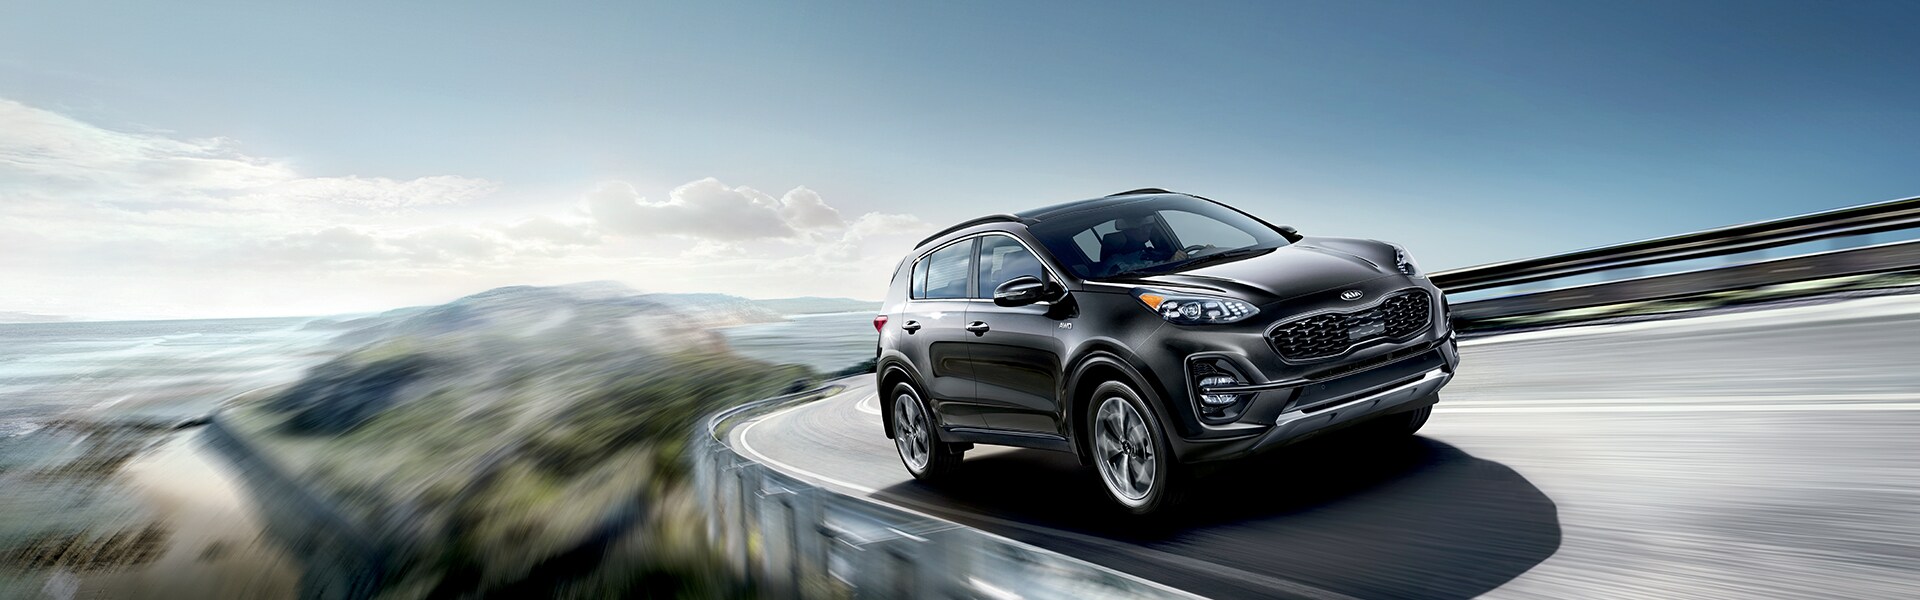 Performance features of the 2022 Sportage at West Broad Kia of Richmond | Sportage Driving Fast on Road